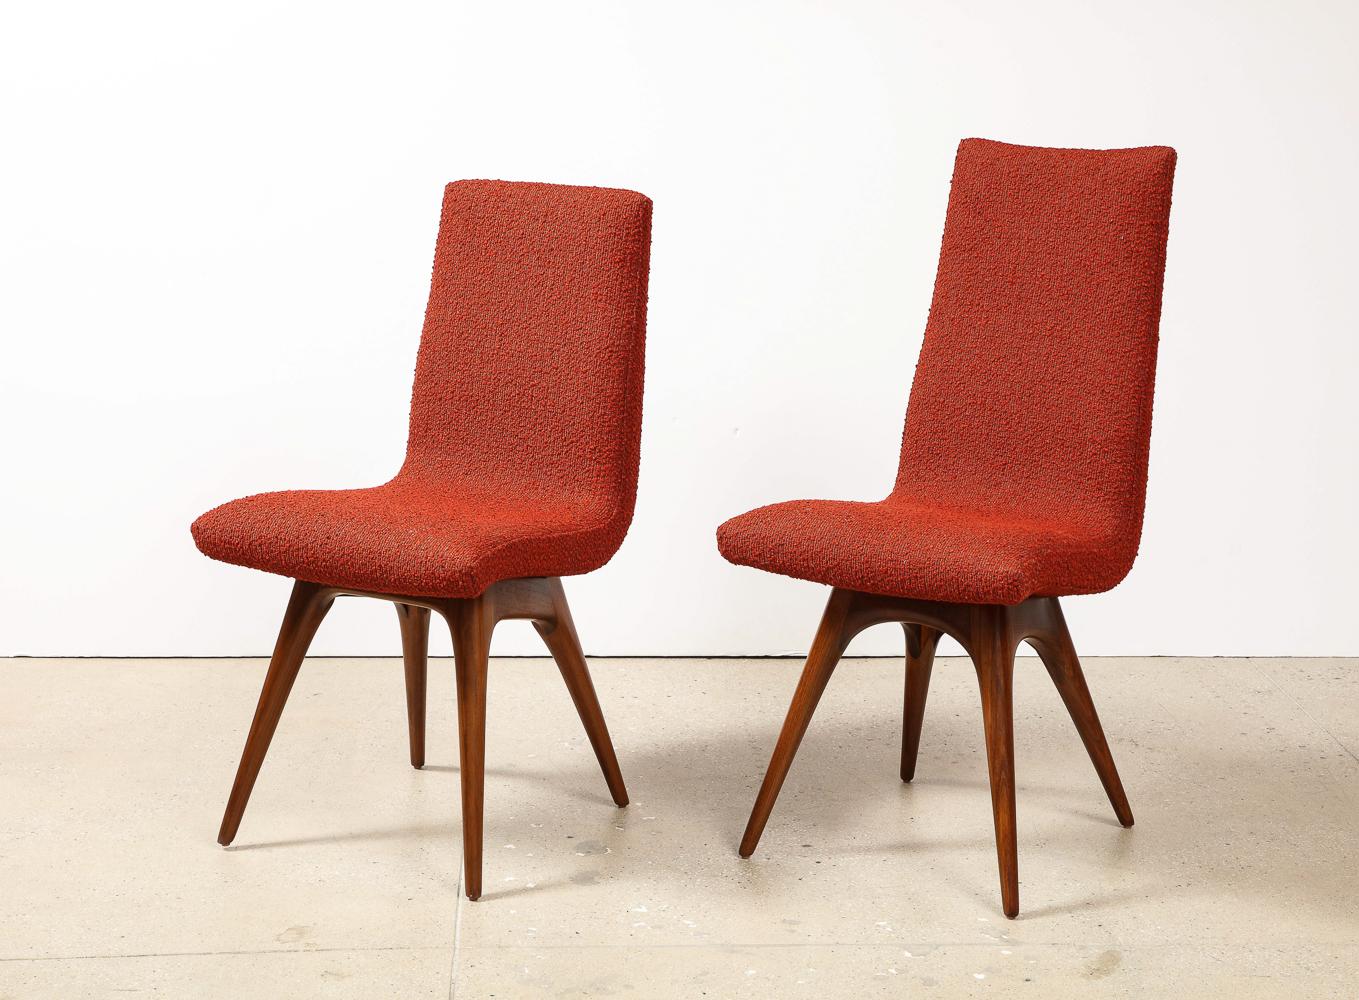 Hand-Crafted Vladimir Kagan Dining Chairs For Sale